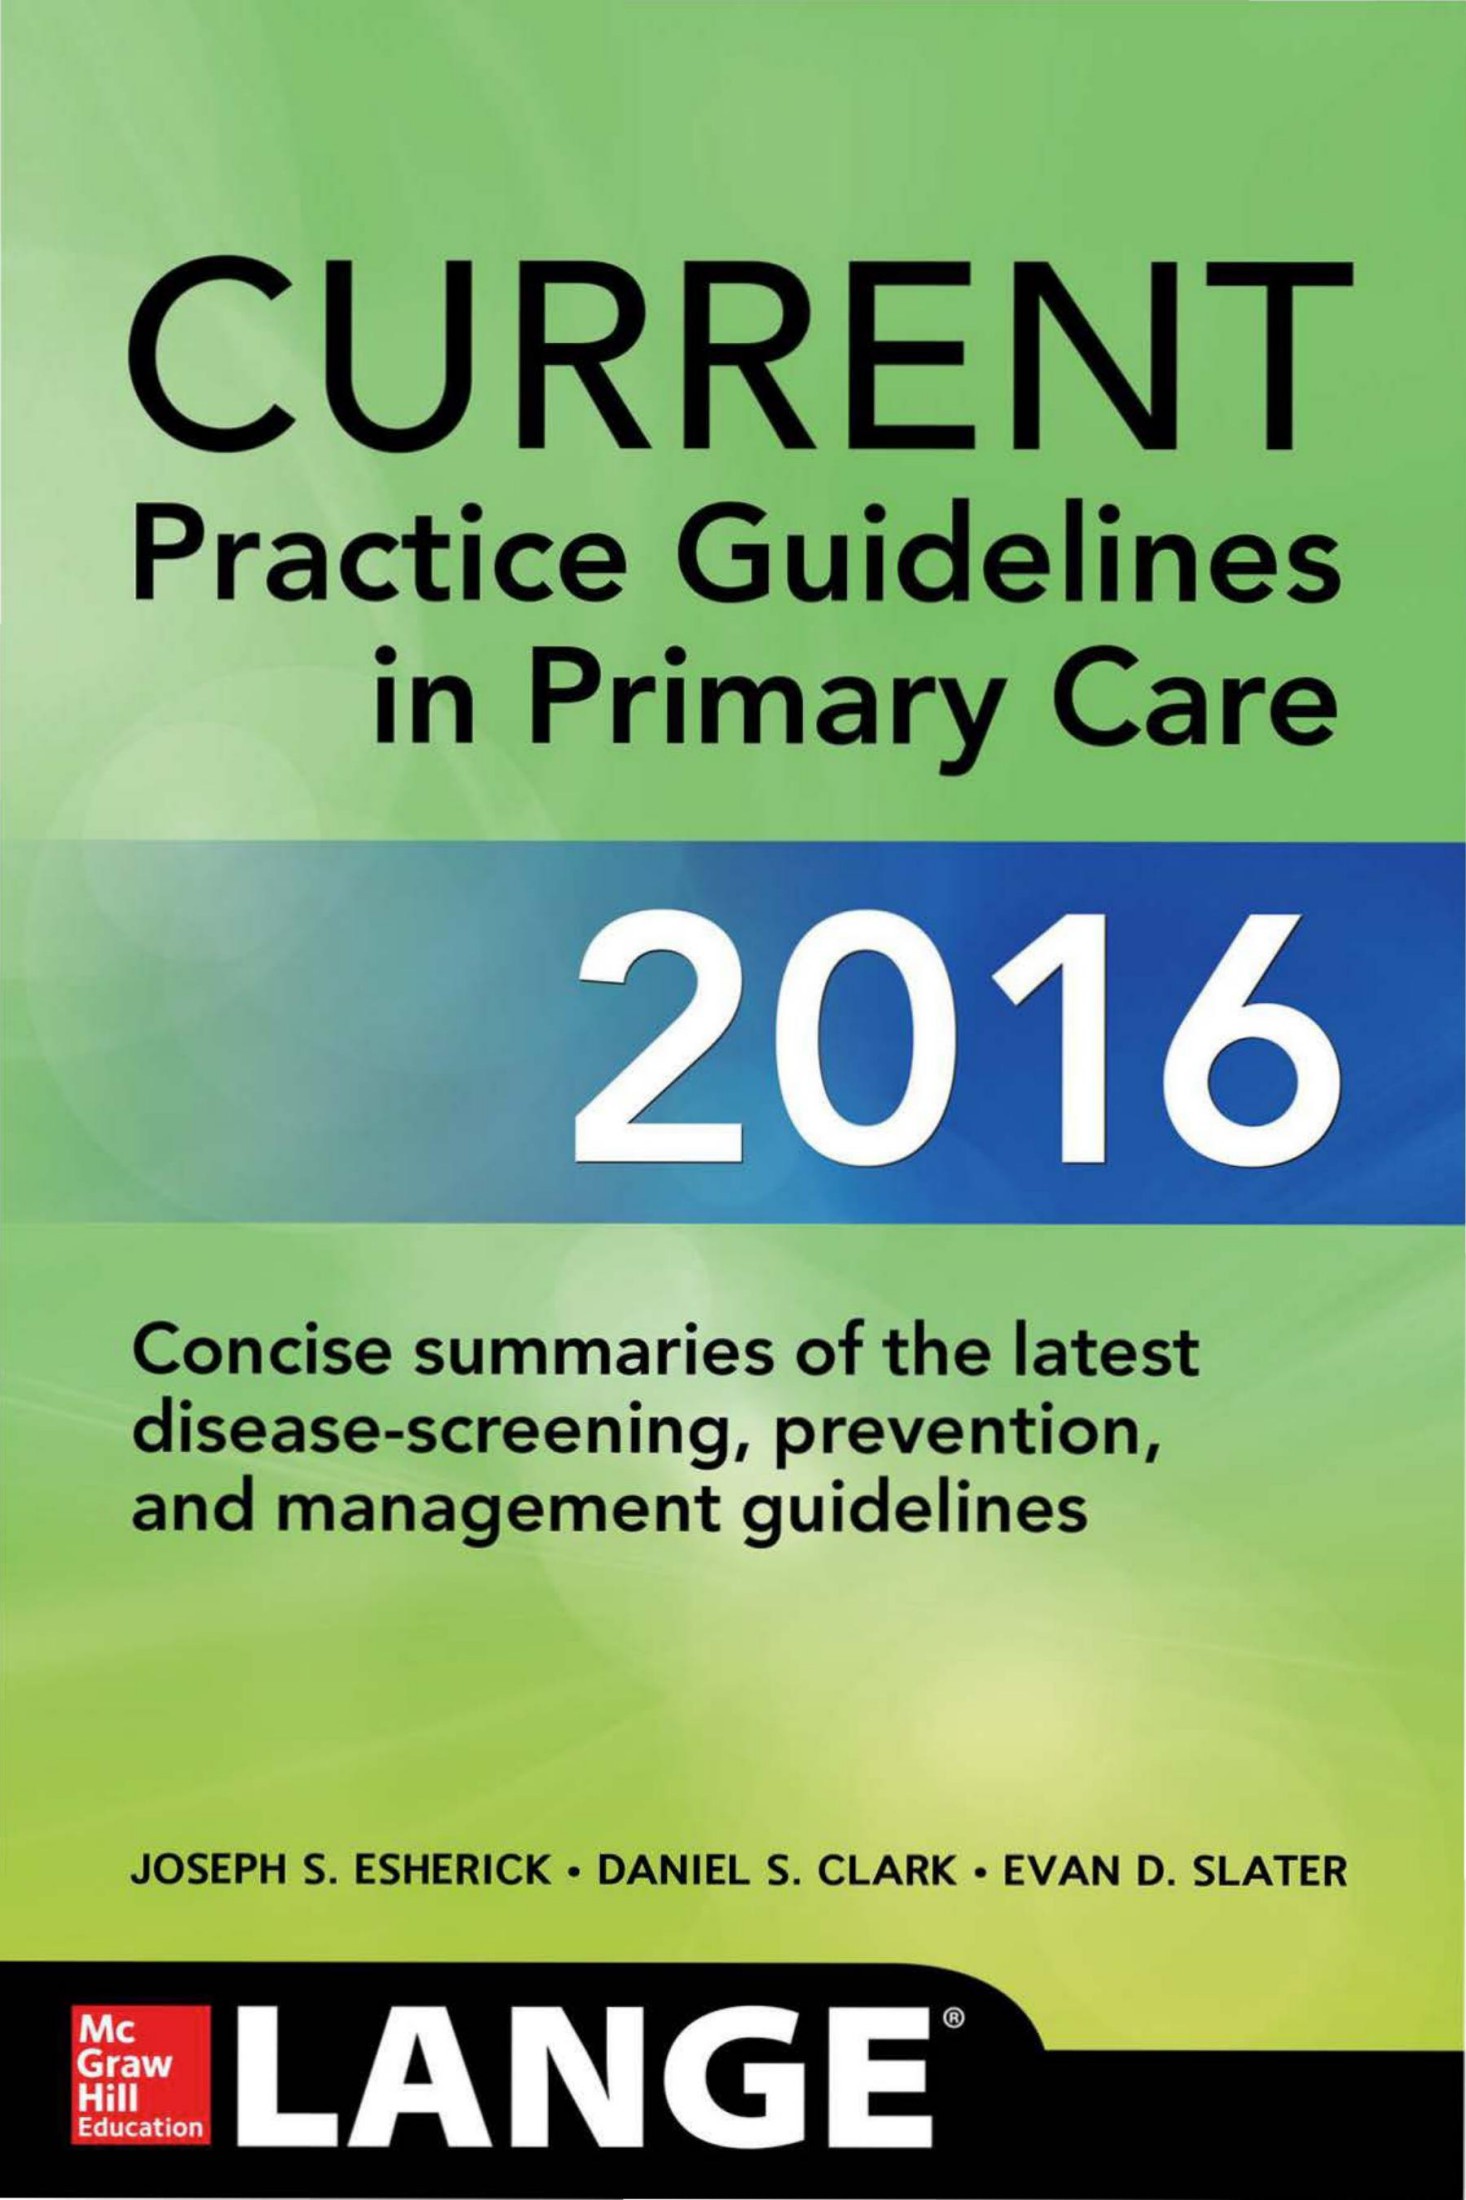 CURRENT Practice Guidelines in Primary Care 2016 14th Edition-PRG & http___medicalbookslibrary.com_.jpg